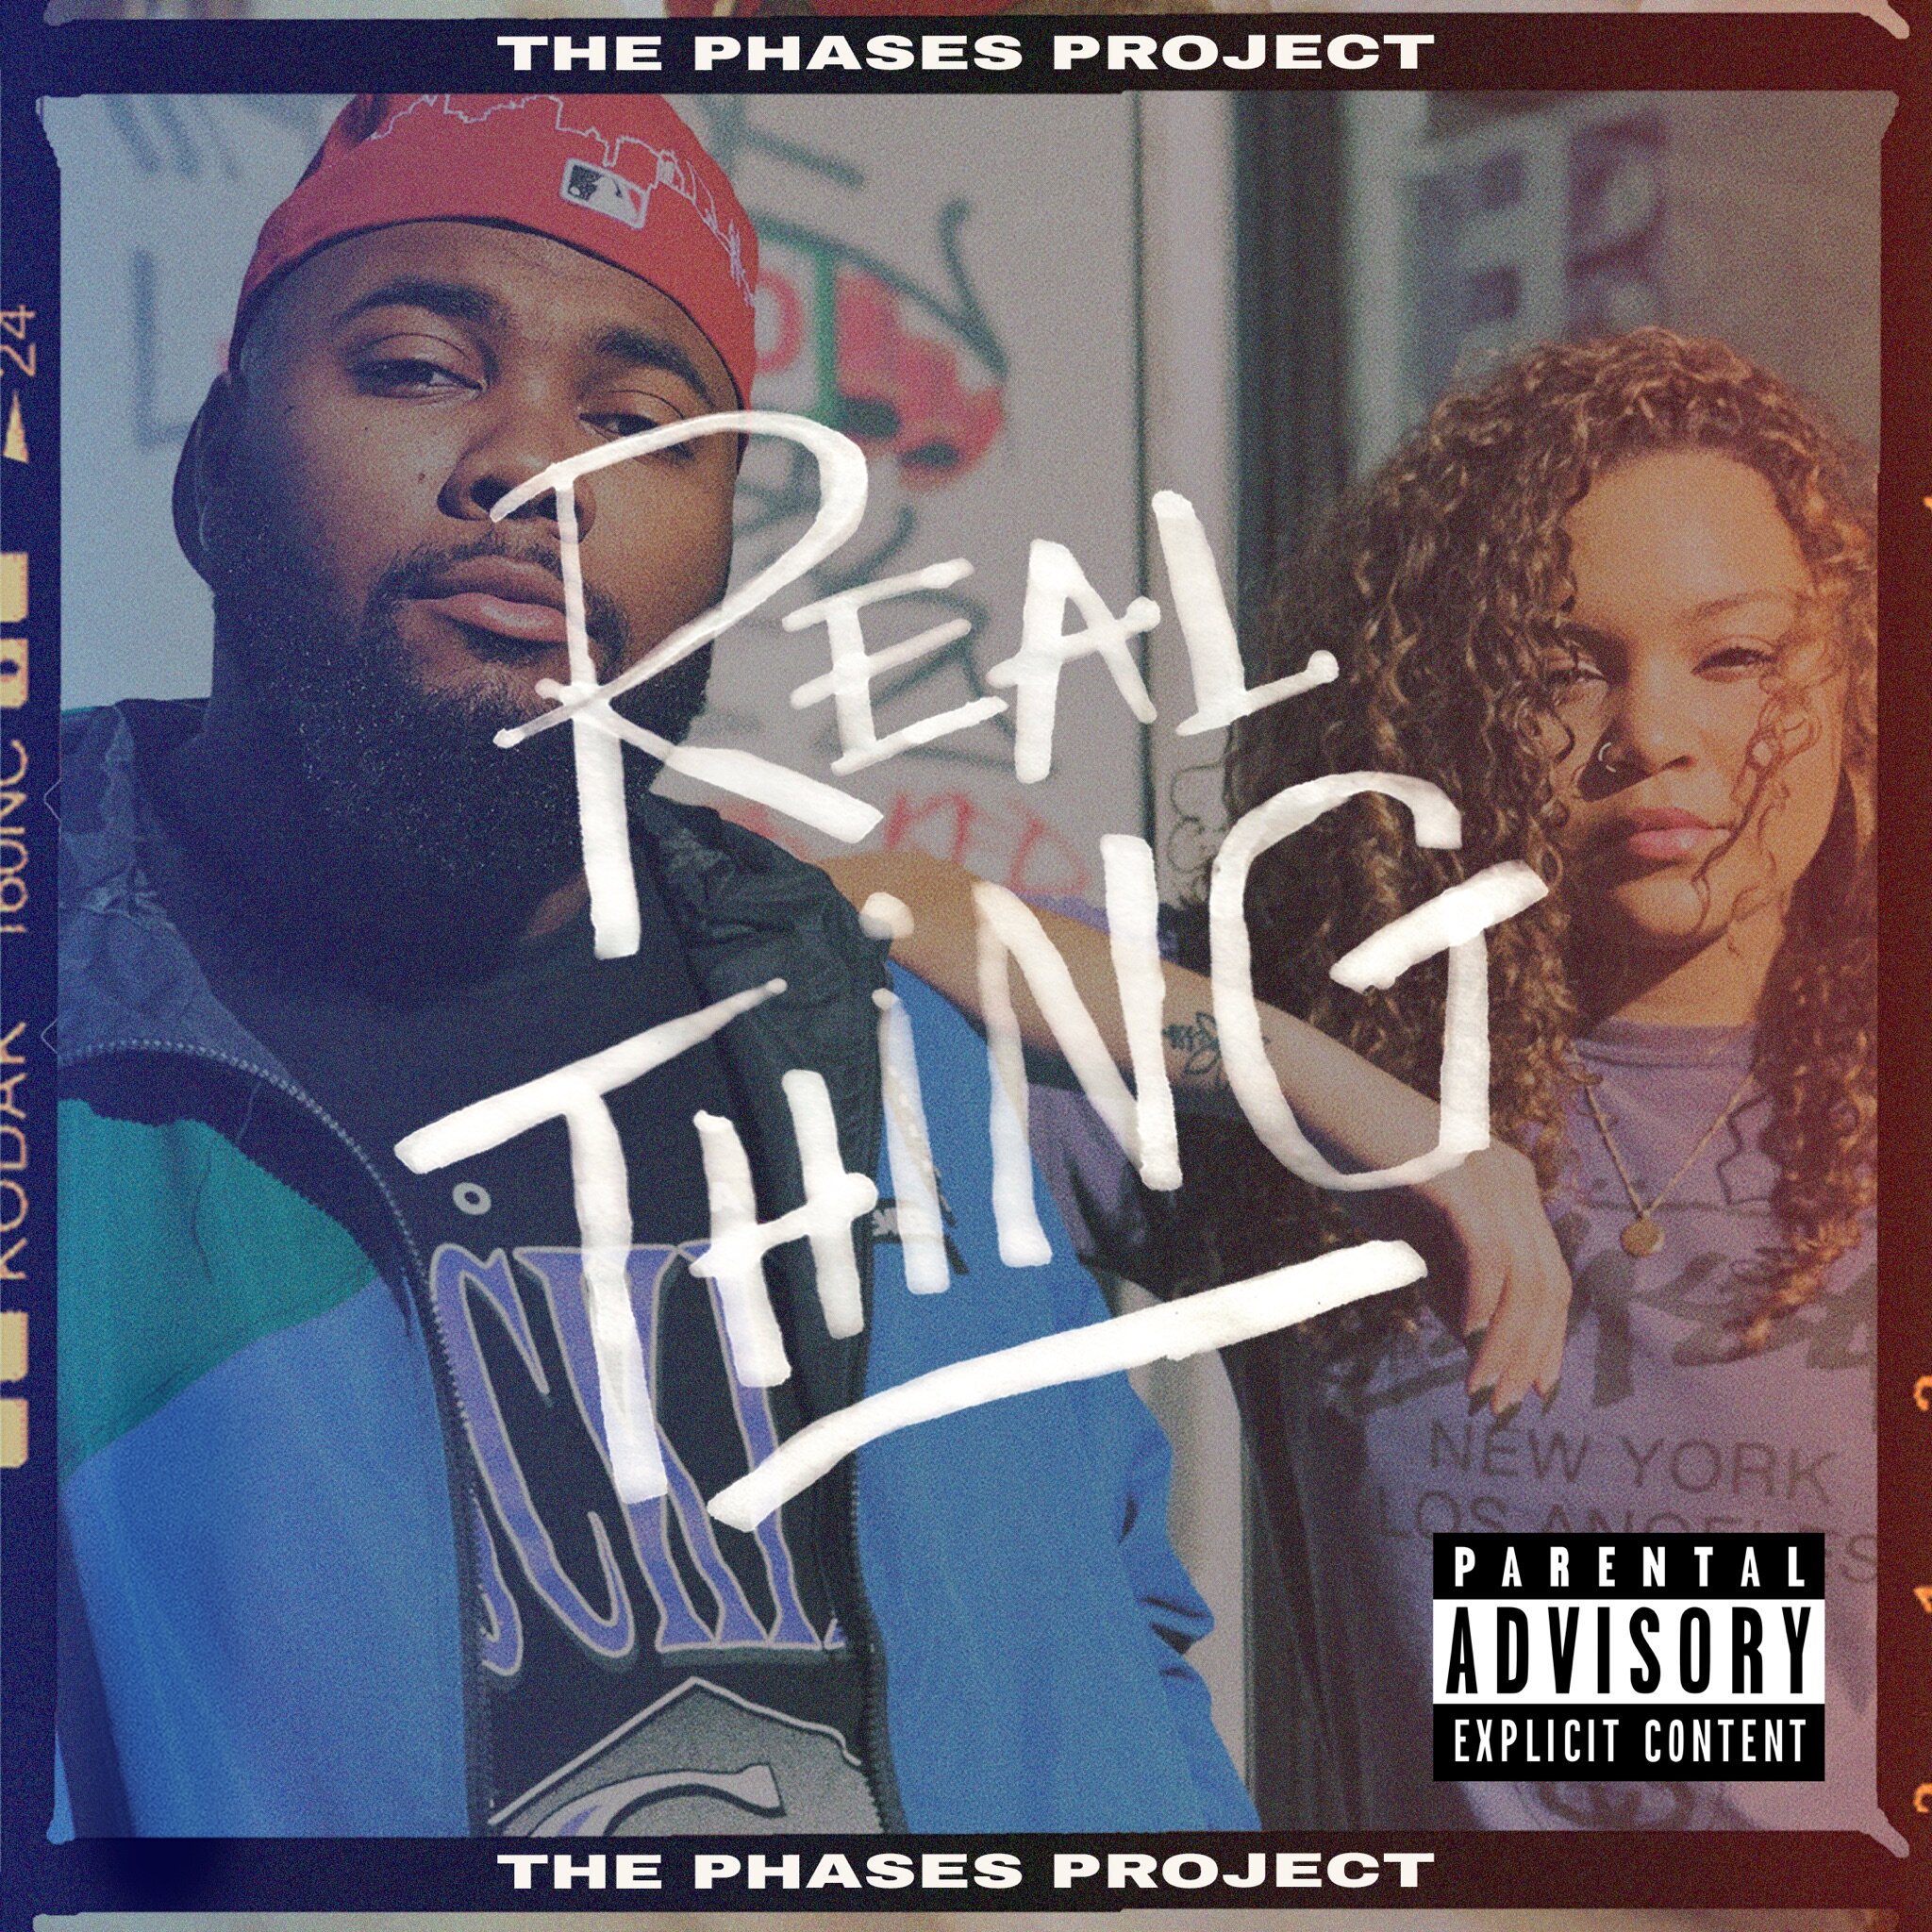 PHASES_REAL THING ALBUM COVER.jpg